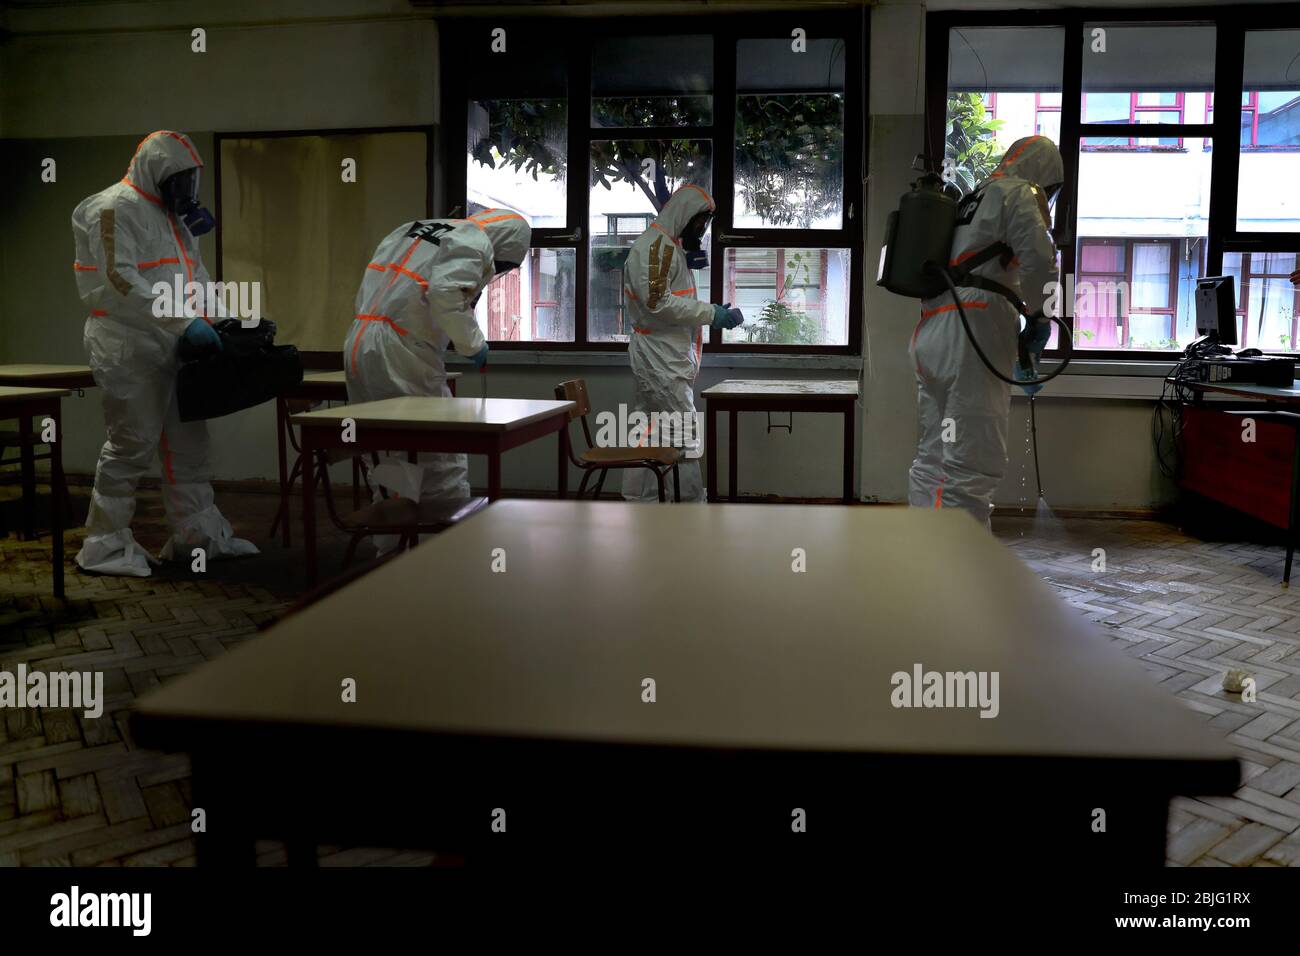 Lisbon, Portugal. 29th Apr, 2020. Portuguese Soldiers wearing protective gear disinfect a high school as the spread of the COVID-19 coronavirus disease continues, in Lisbon, Portugal on April 29, 2020. As Portugal's state of emergency will end on May 2 and the Government expected to reopen high schools in mid-May, more than 400 members of the country's armed forces are carrying out the disinfection of schools. Credit: Pedro Fiuza/ZUMA Wire/Alamy Live News Stock Photo